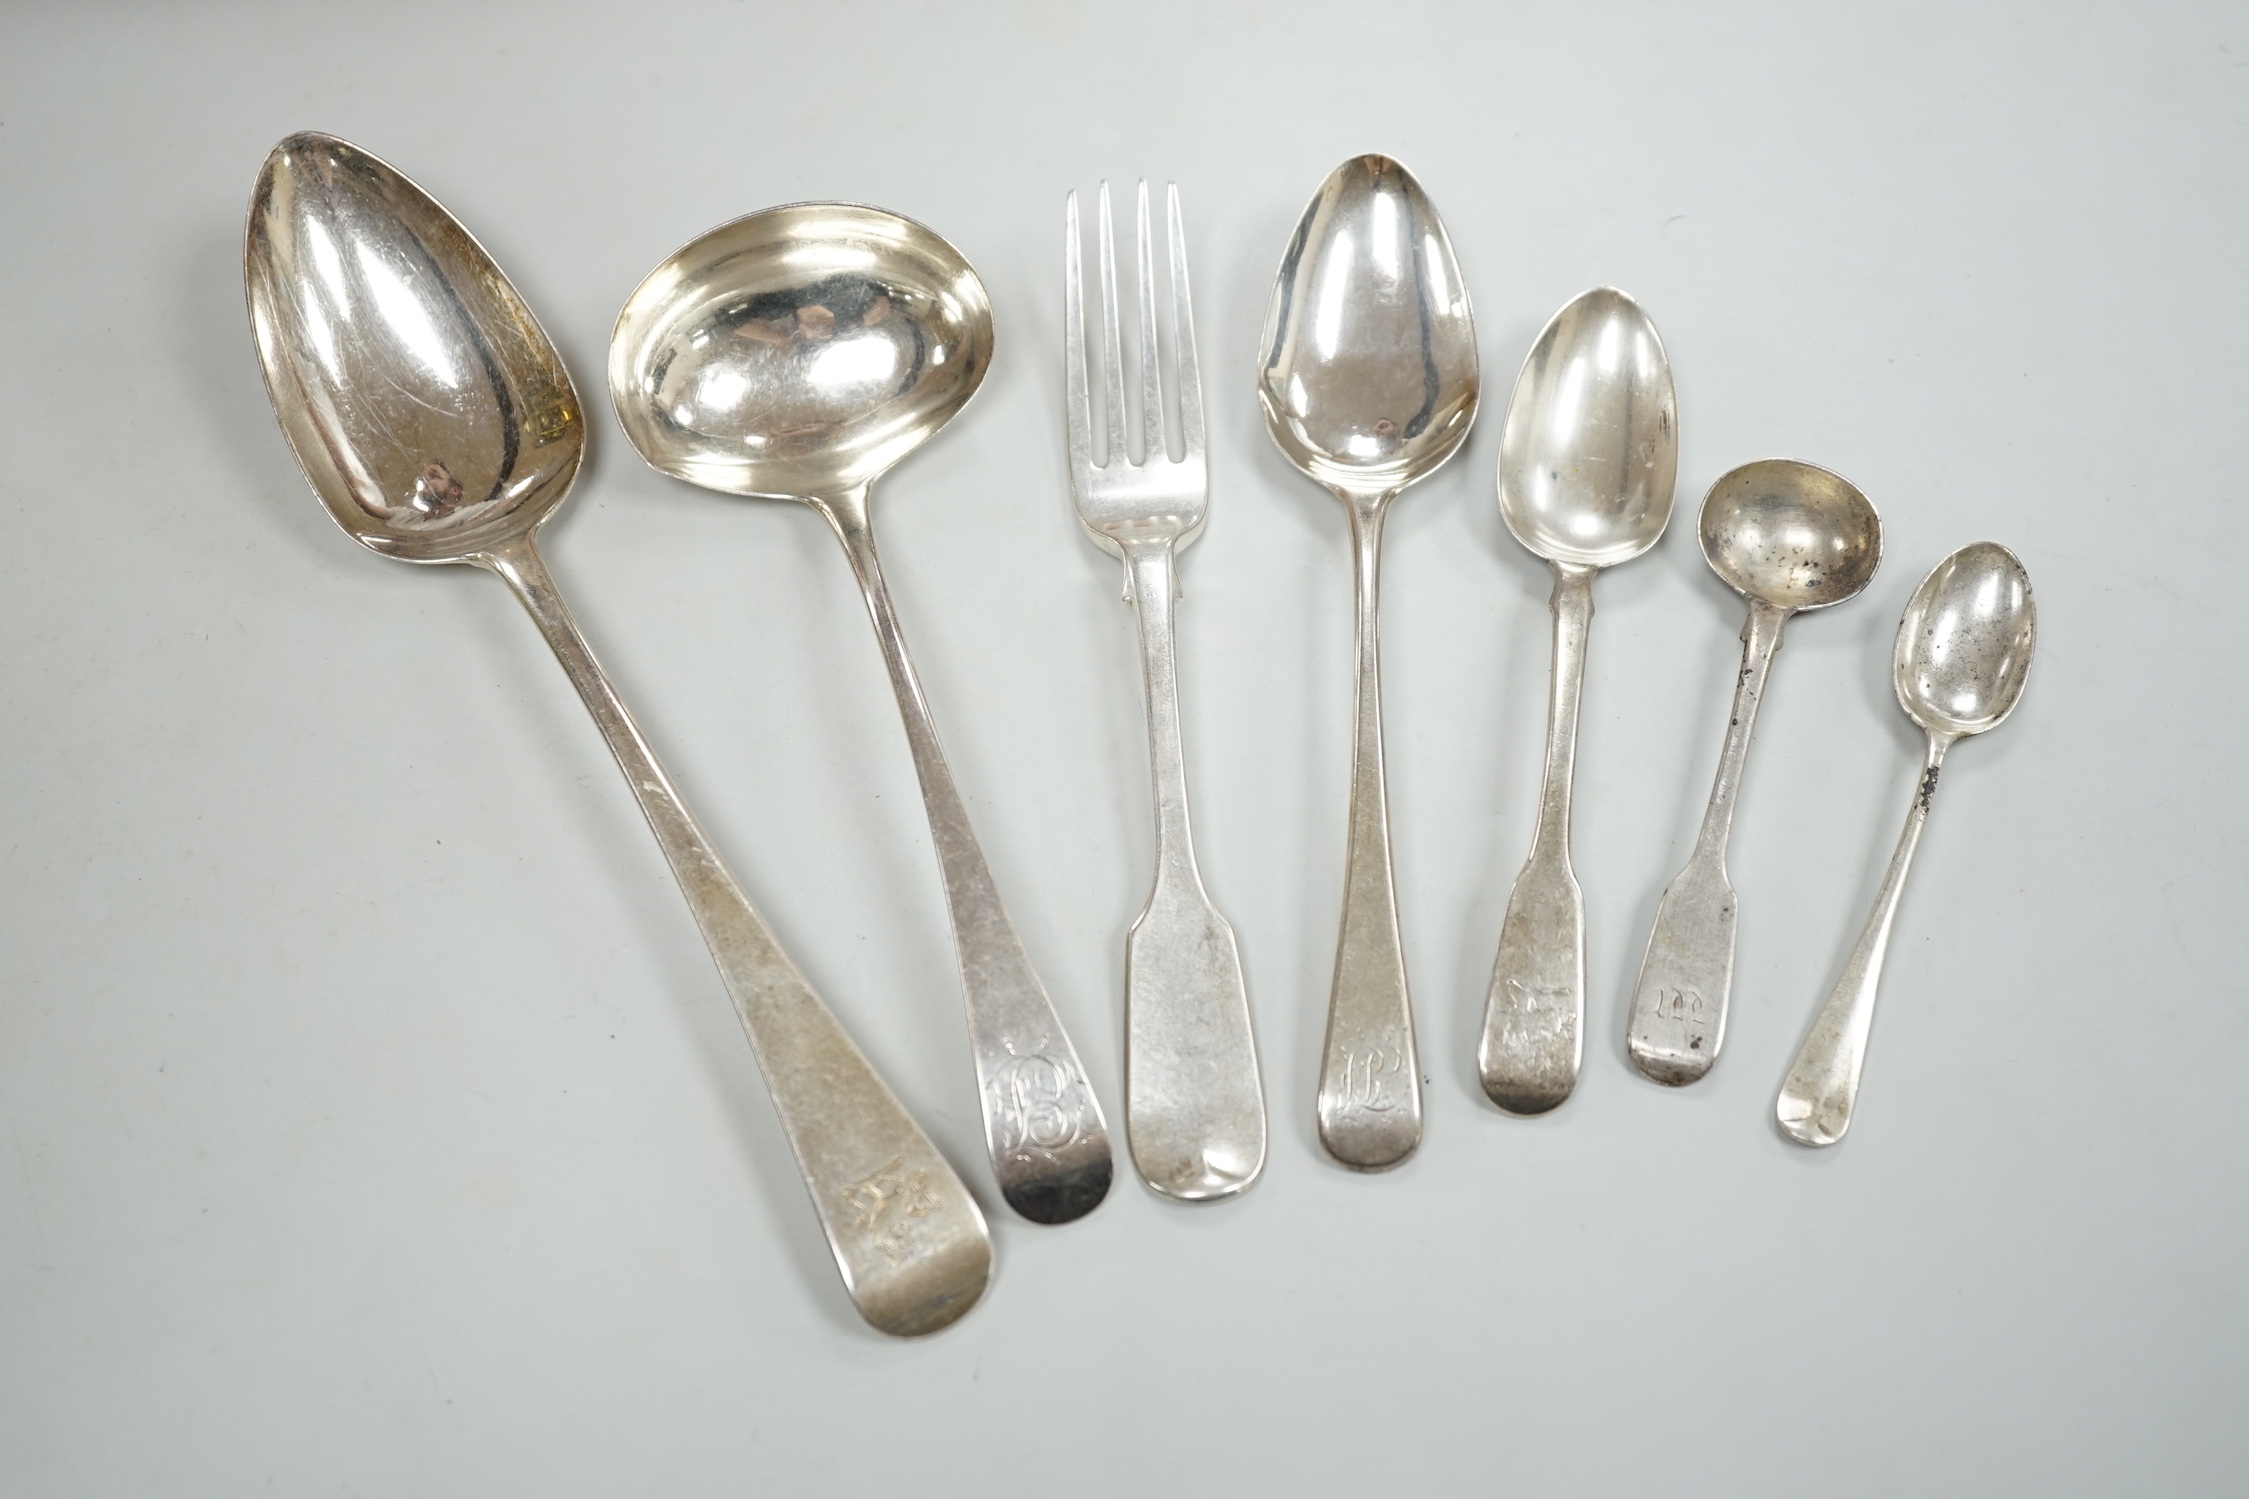 A collection of George III and later silver flatware including a sauce ladle, six Old English pattern tablespoons and a fiddle pattern tablespoon, nine dessert forks, six dessert spoons and twenty seven tea, coffee and s